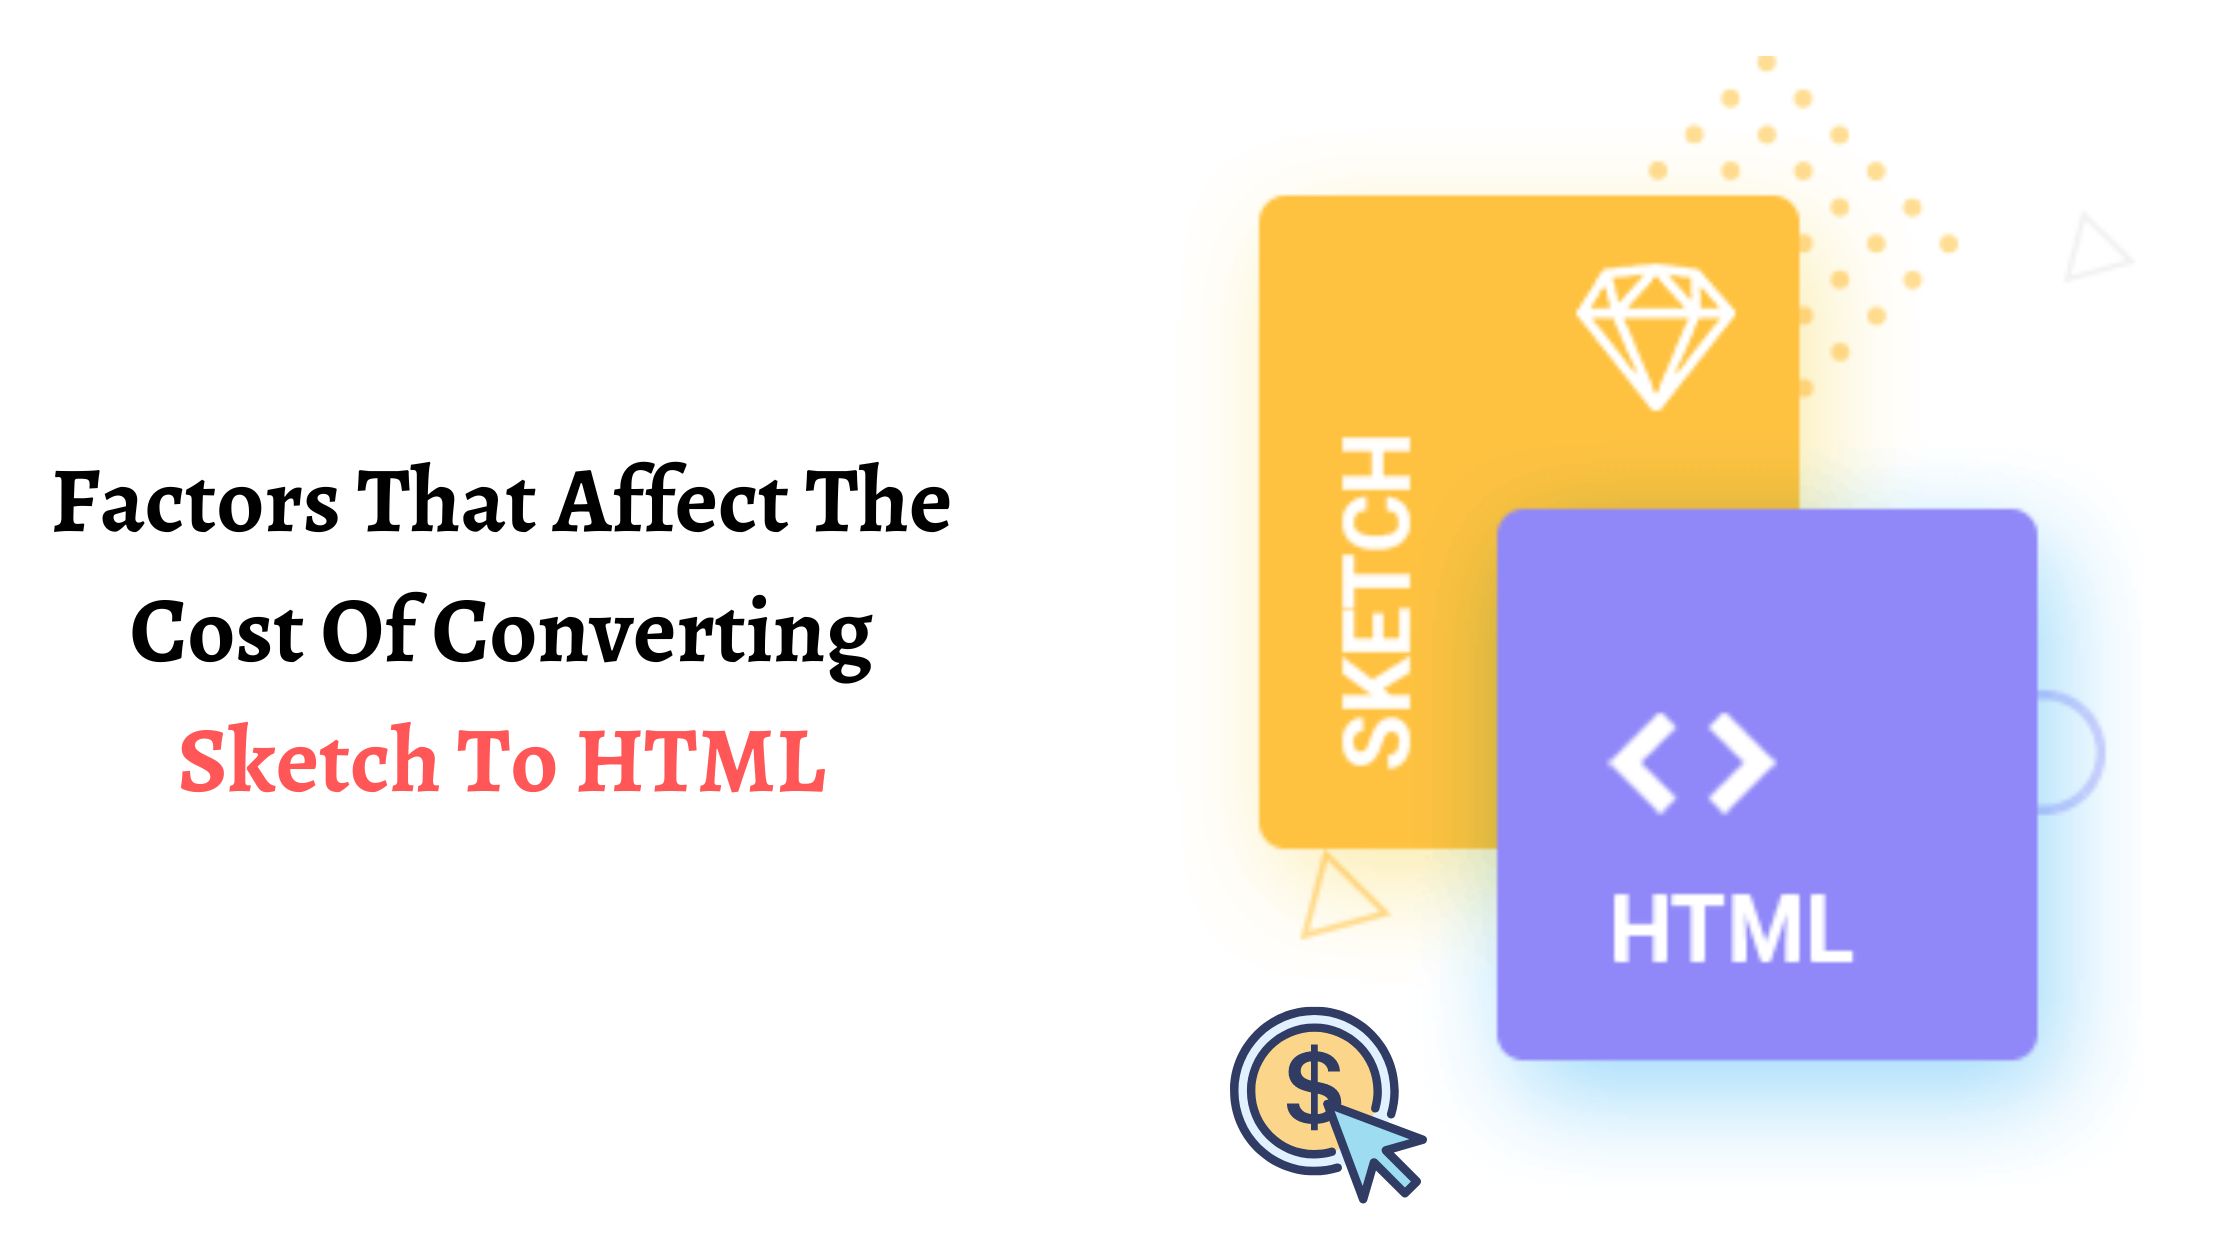 Factors That Affect The Cost Of Converting Sketch To HTML